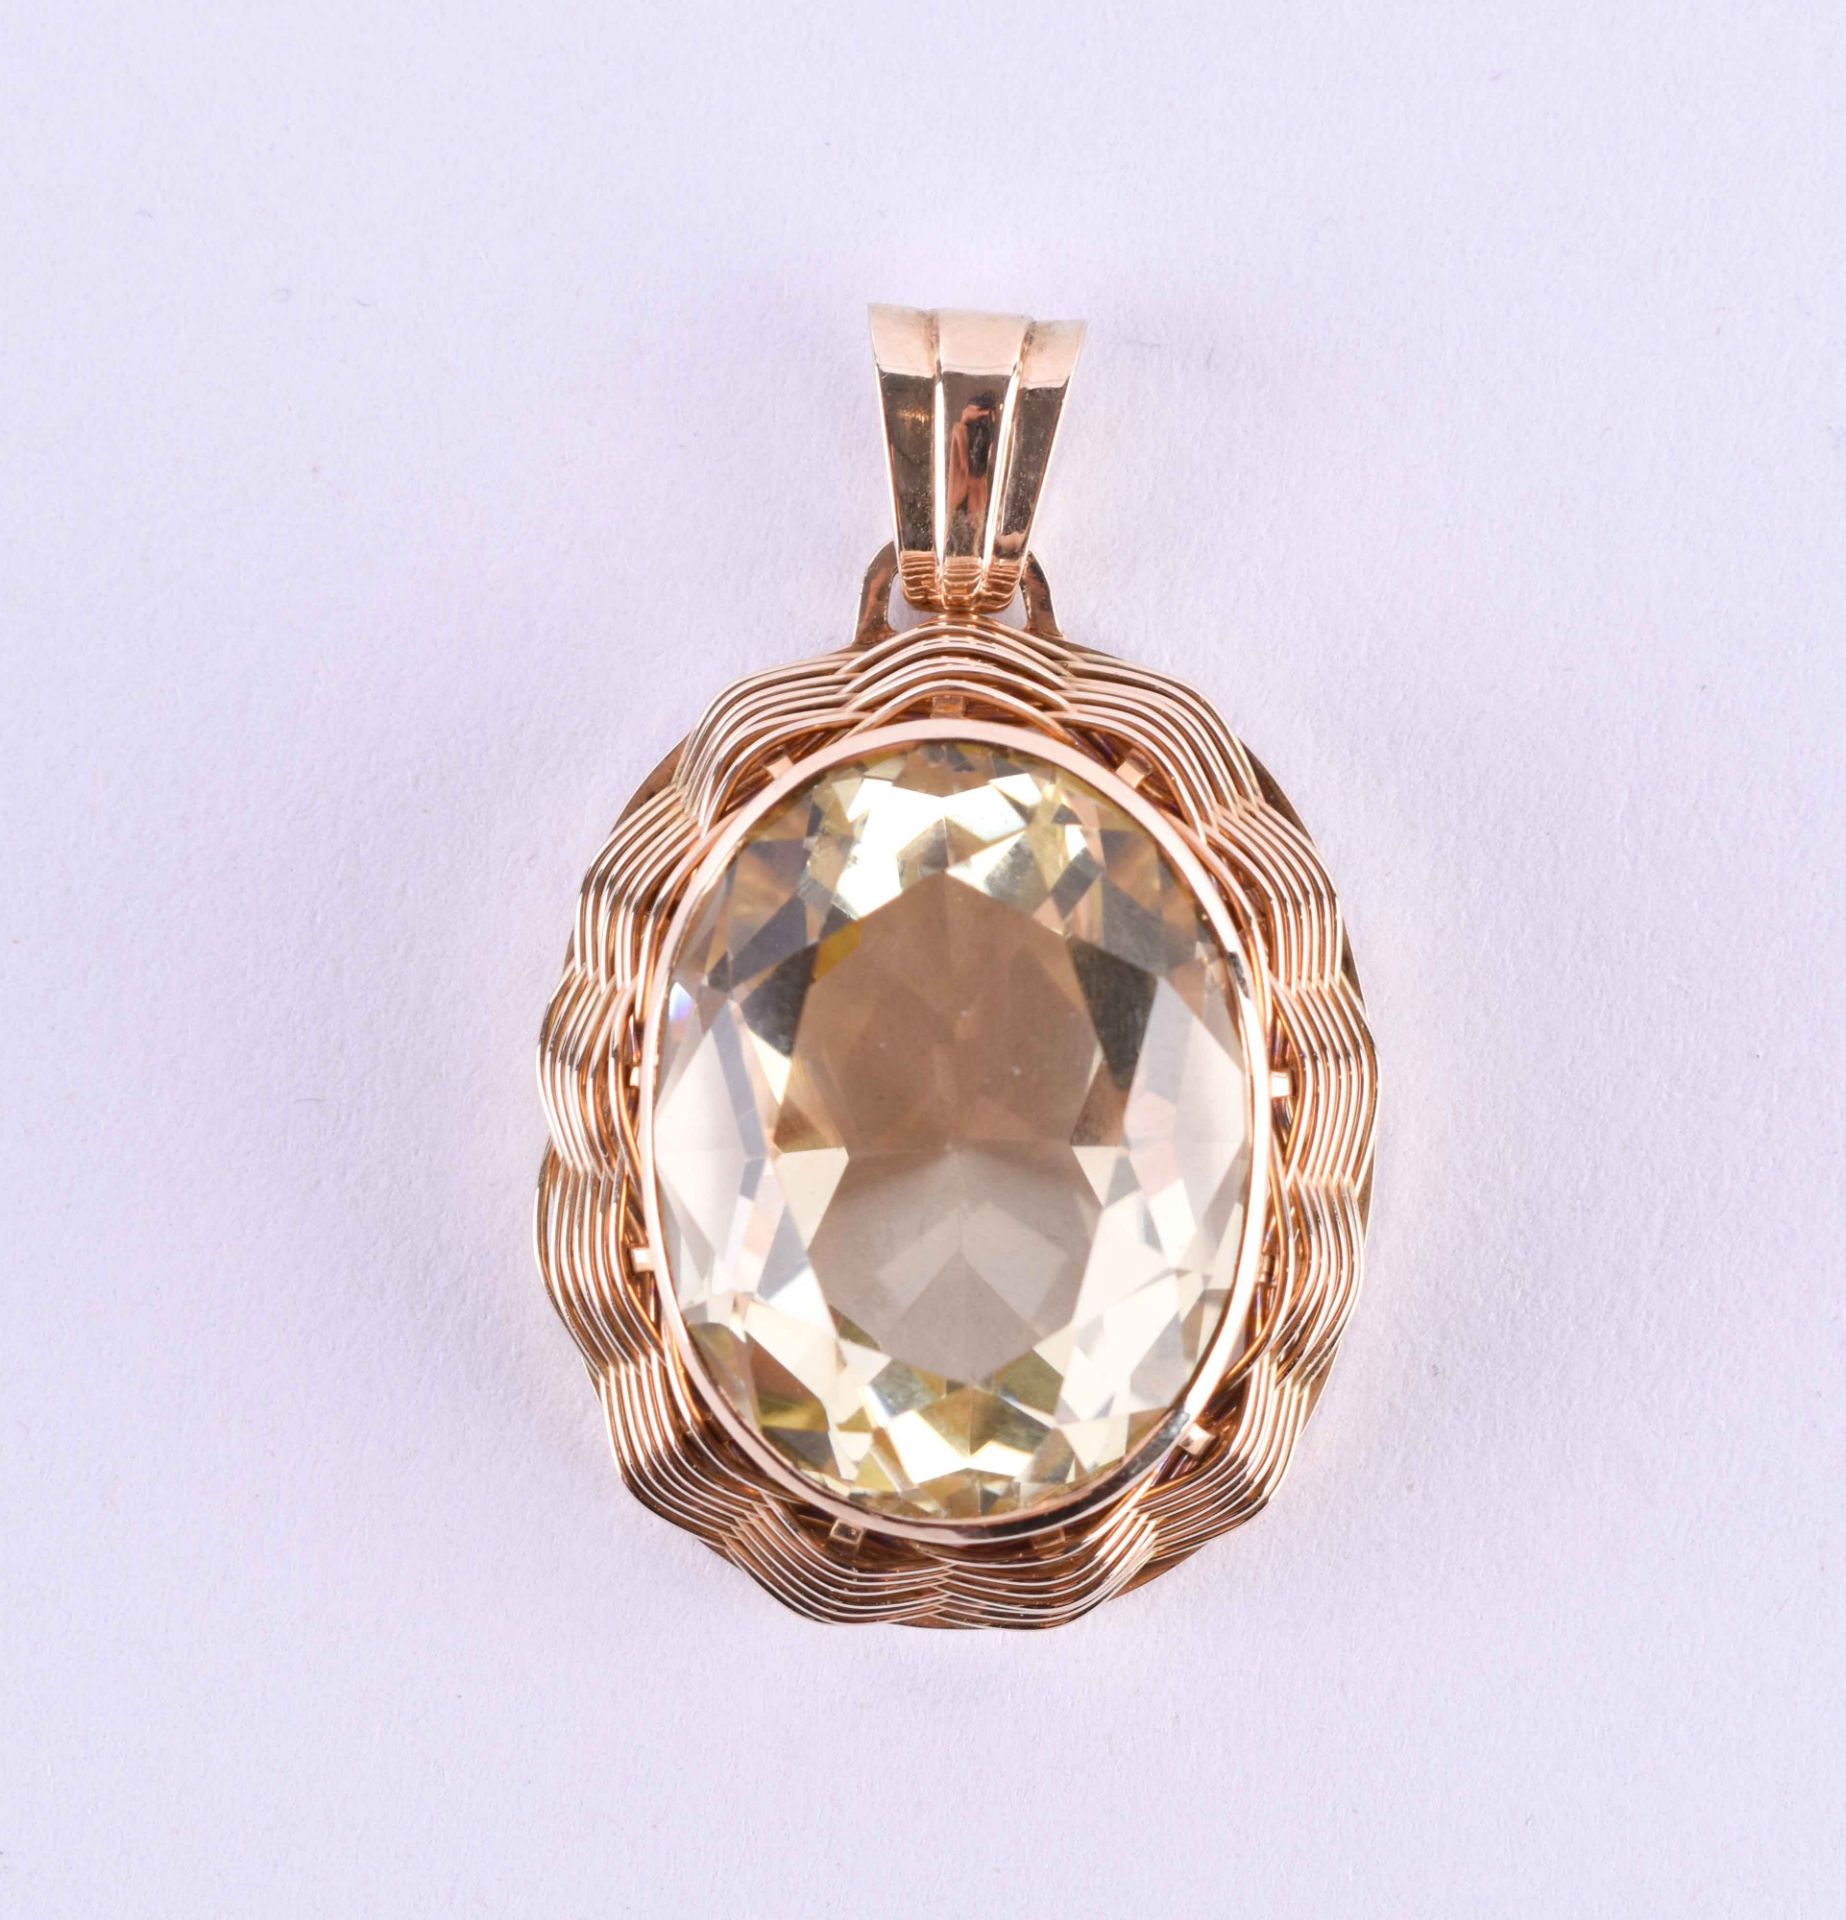 Pendant probably with large citrine